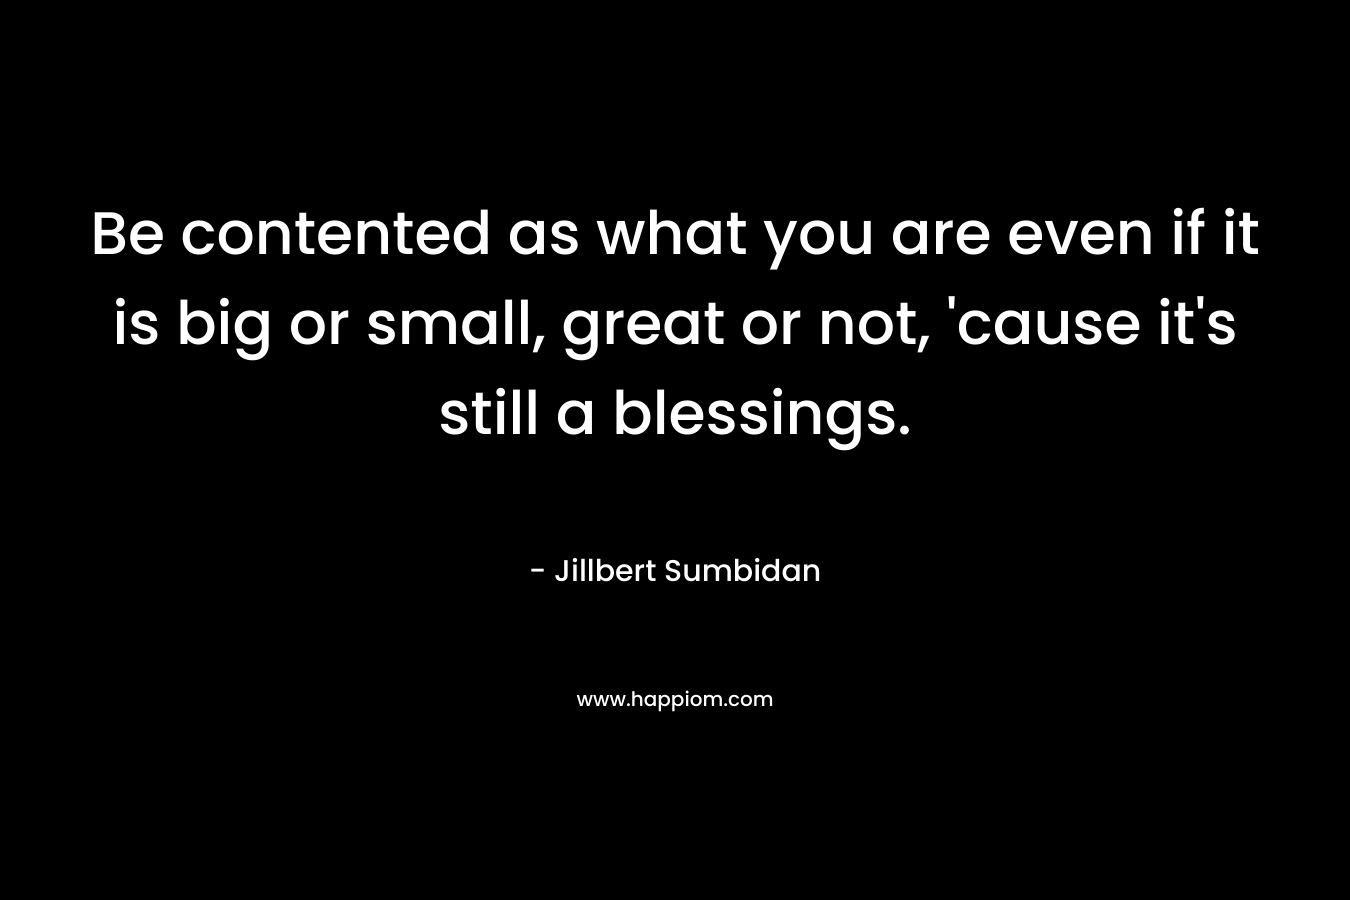 Be contented as what you are even if it is big or small, great or not, 'cause it's still a blessings.